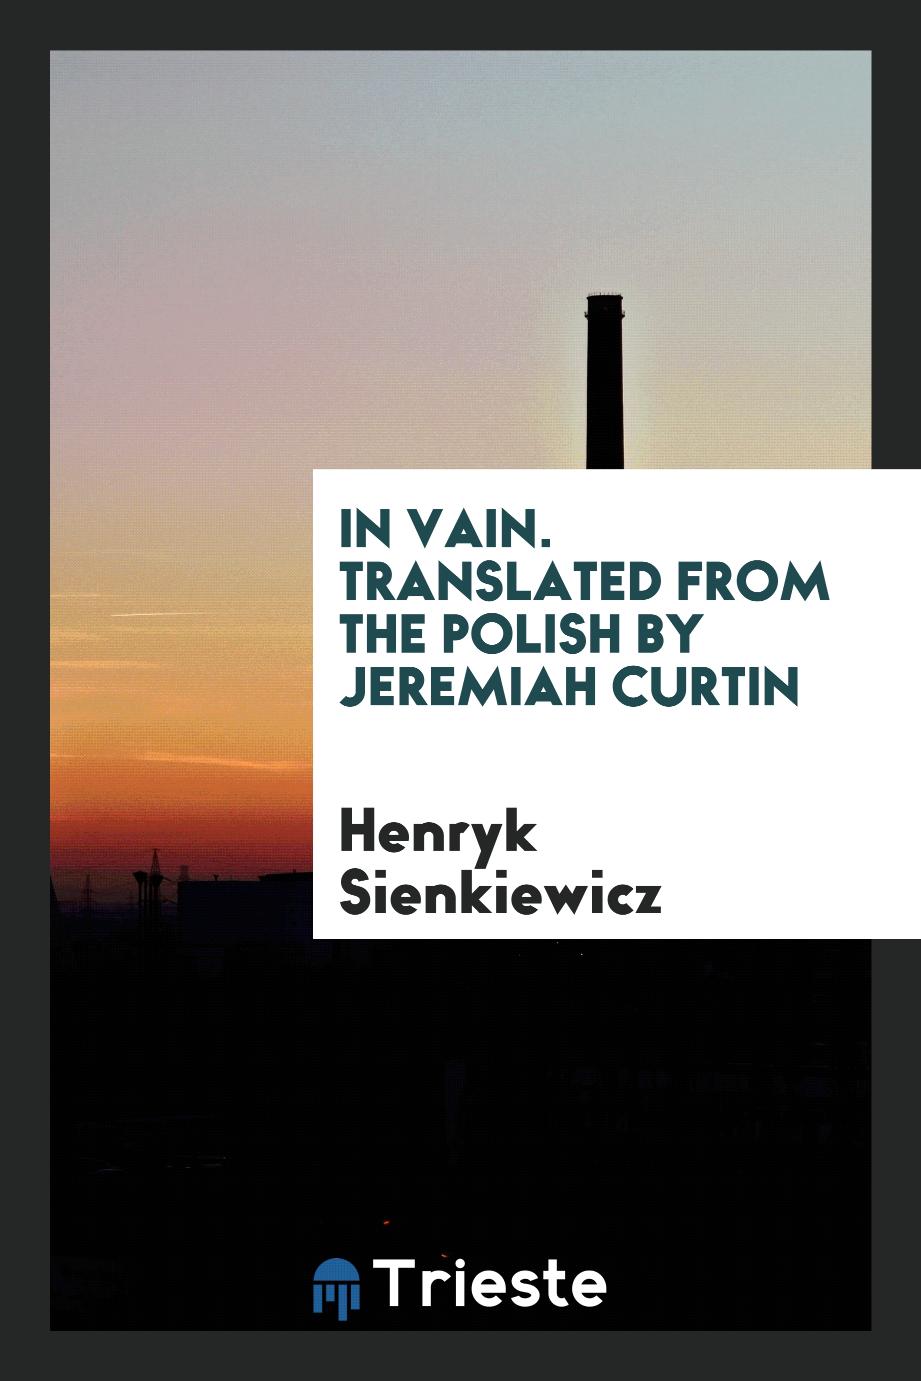 In vain. Translated from the Polish by Jeremiah Curtin